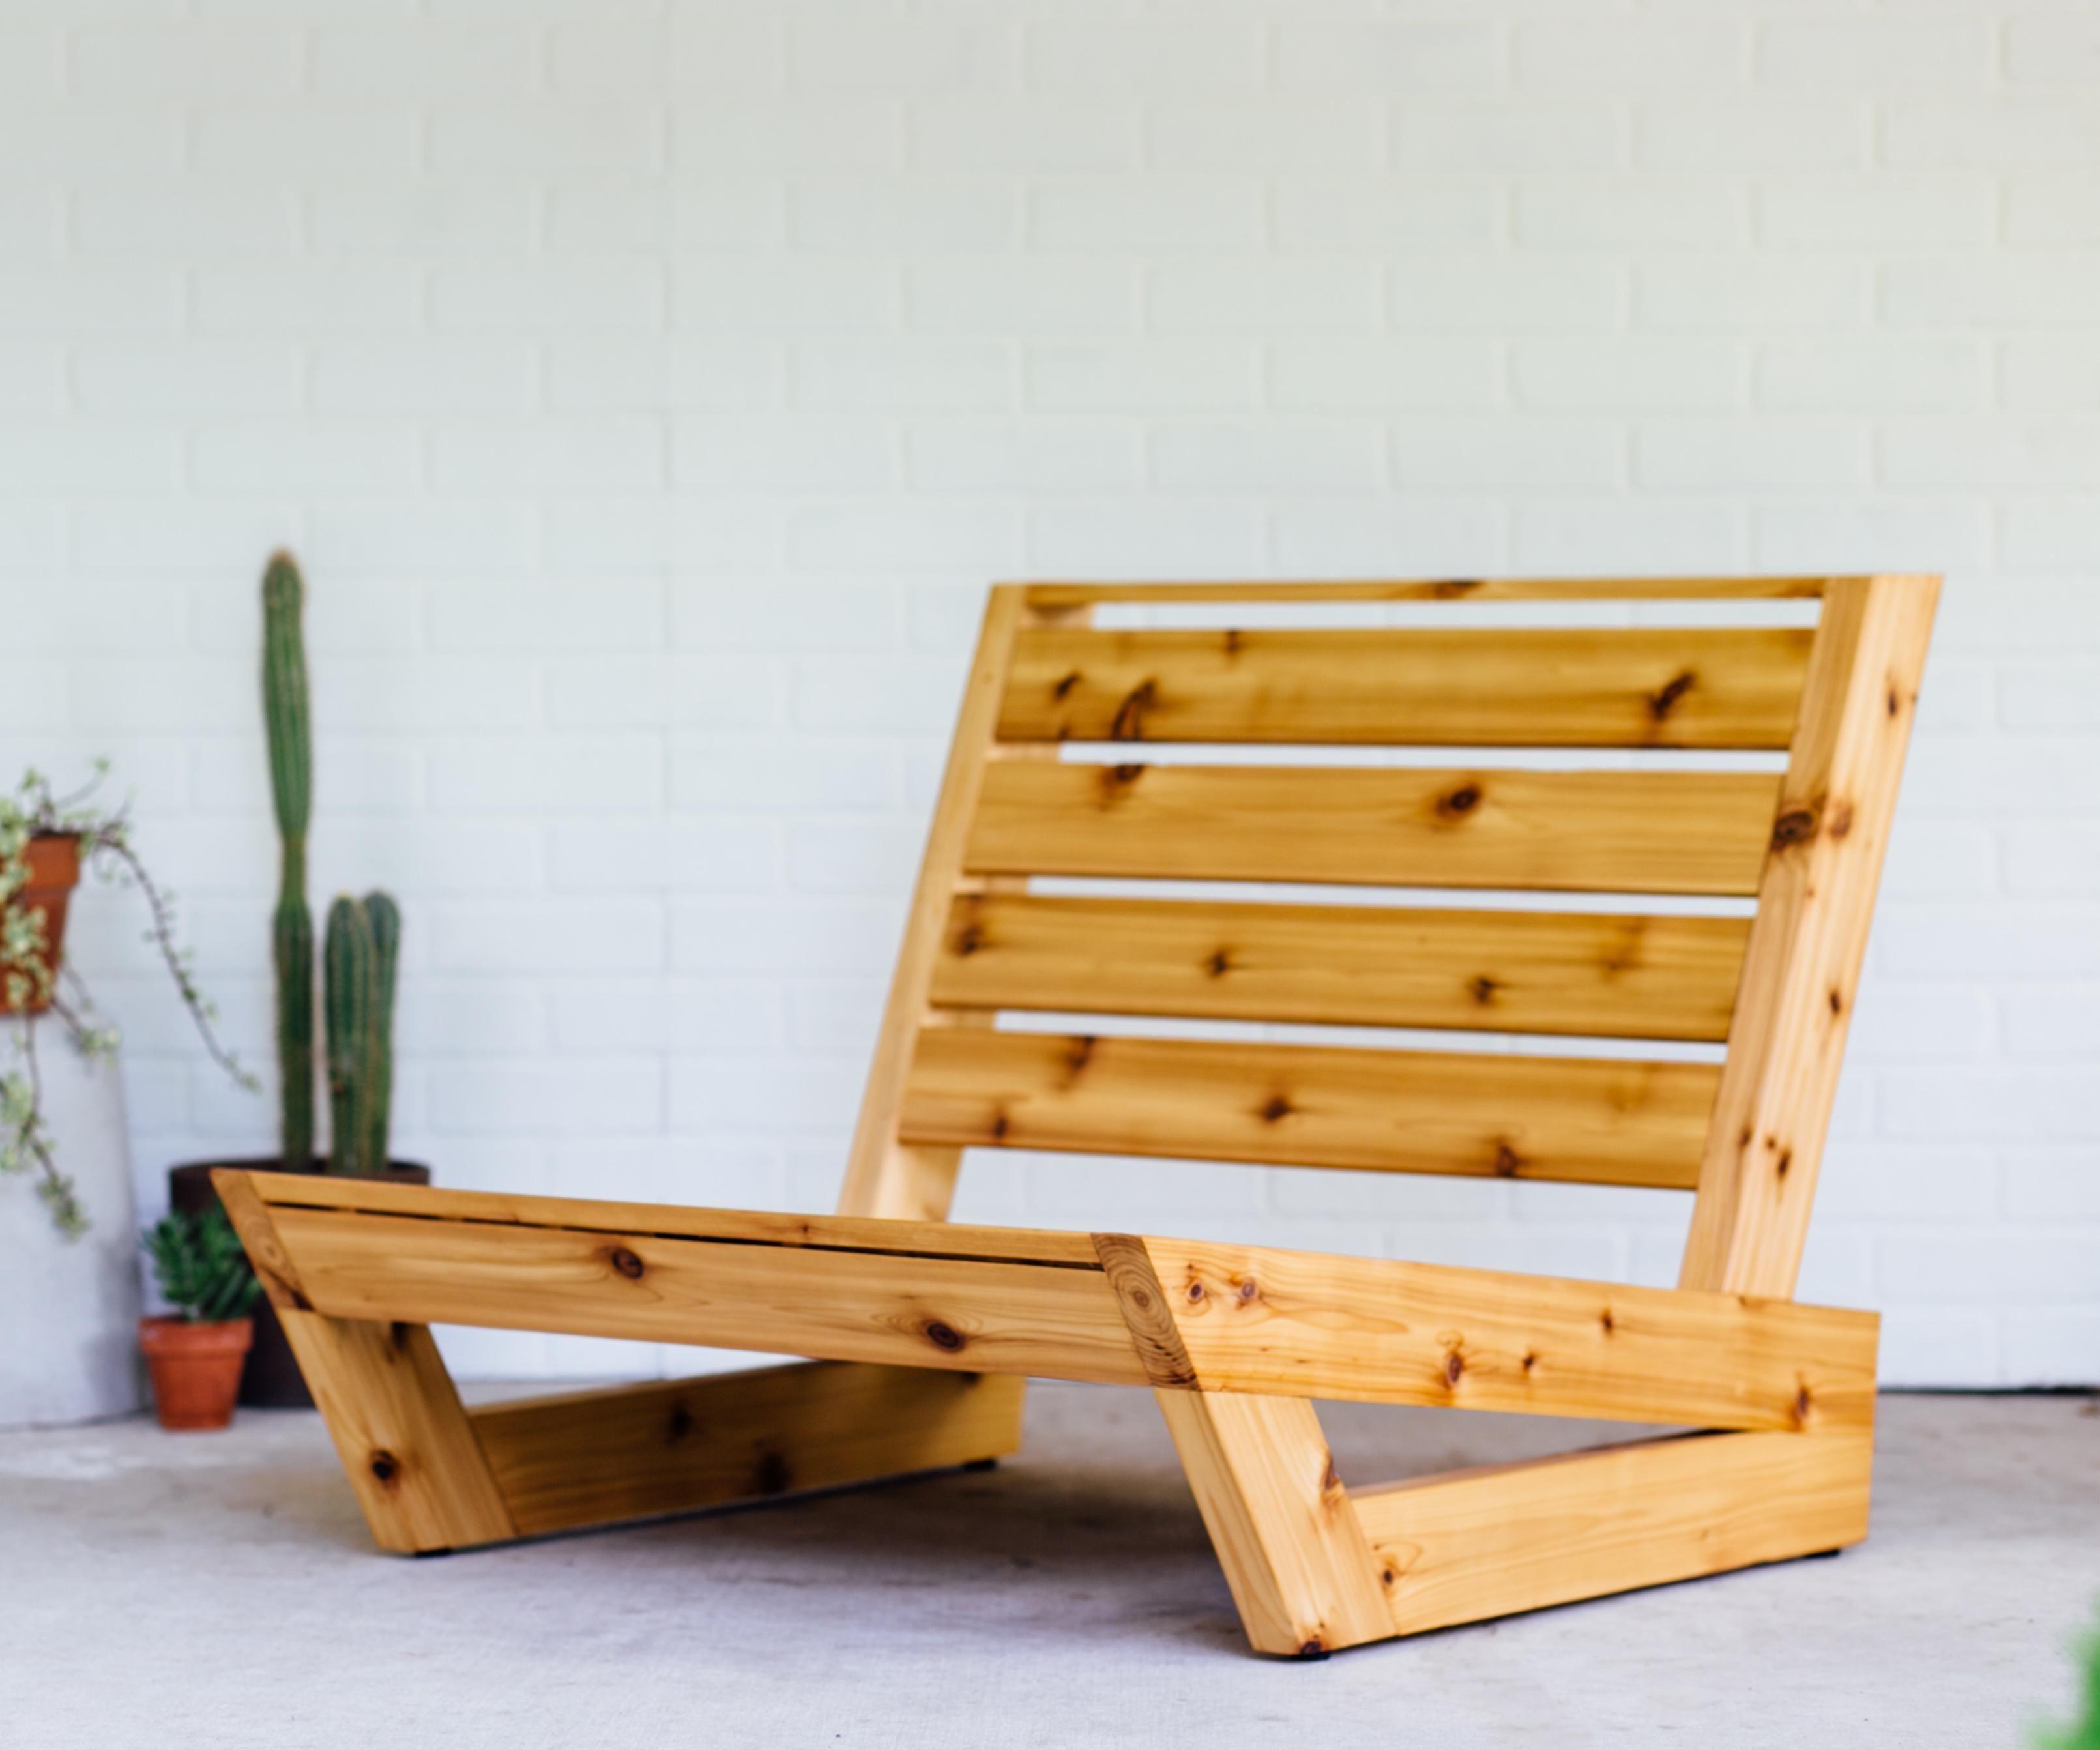 How to Build an Outdoor Lounge Chair